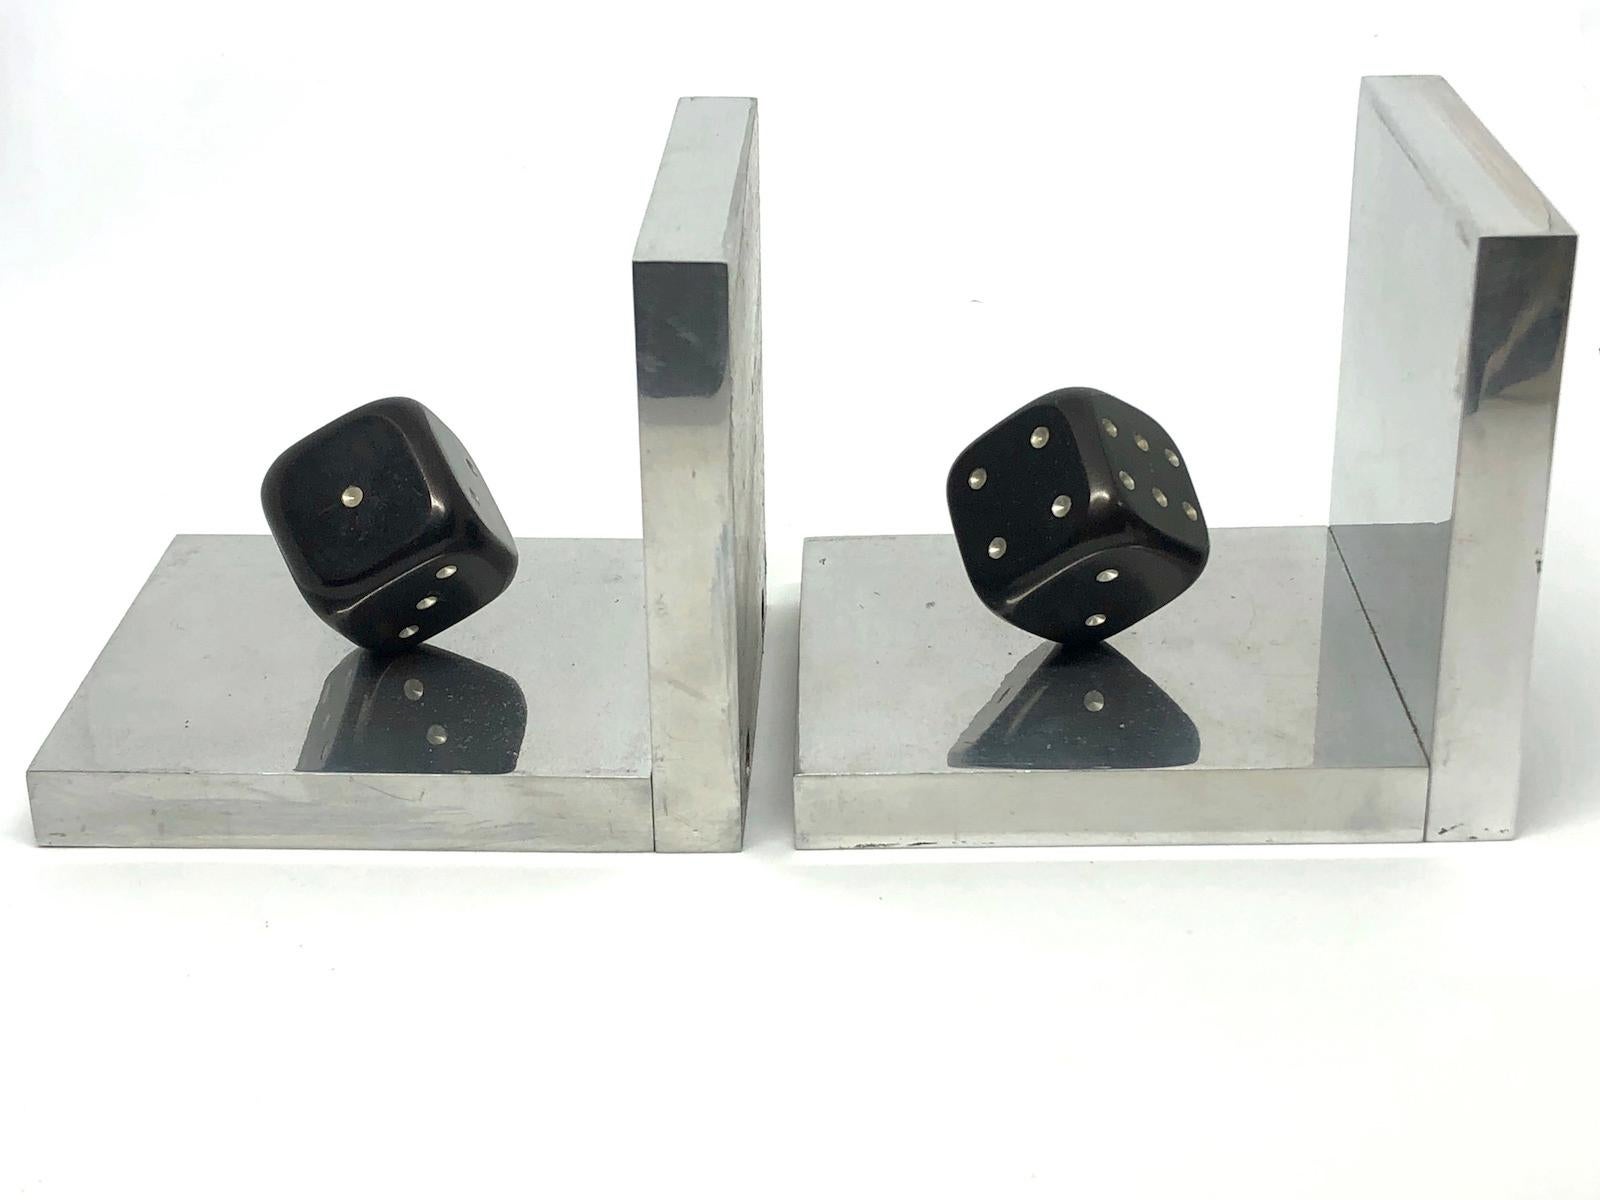 Mid-20th Century Pair of Art Deco Dice Bookends Black and Chrome Vintage German